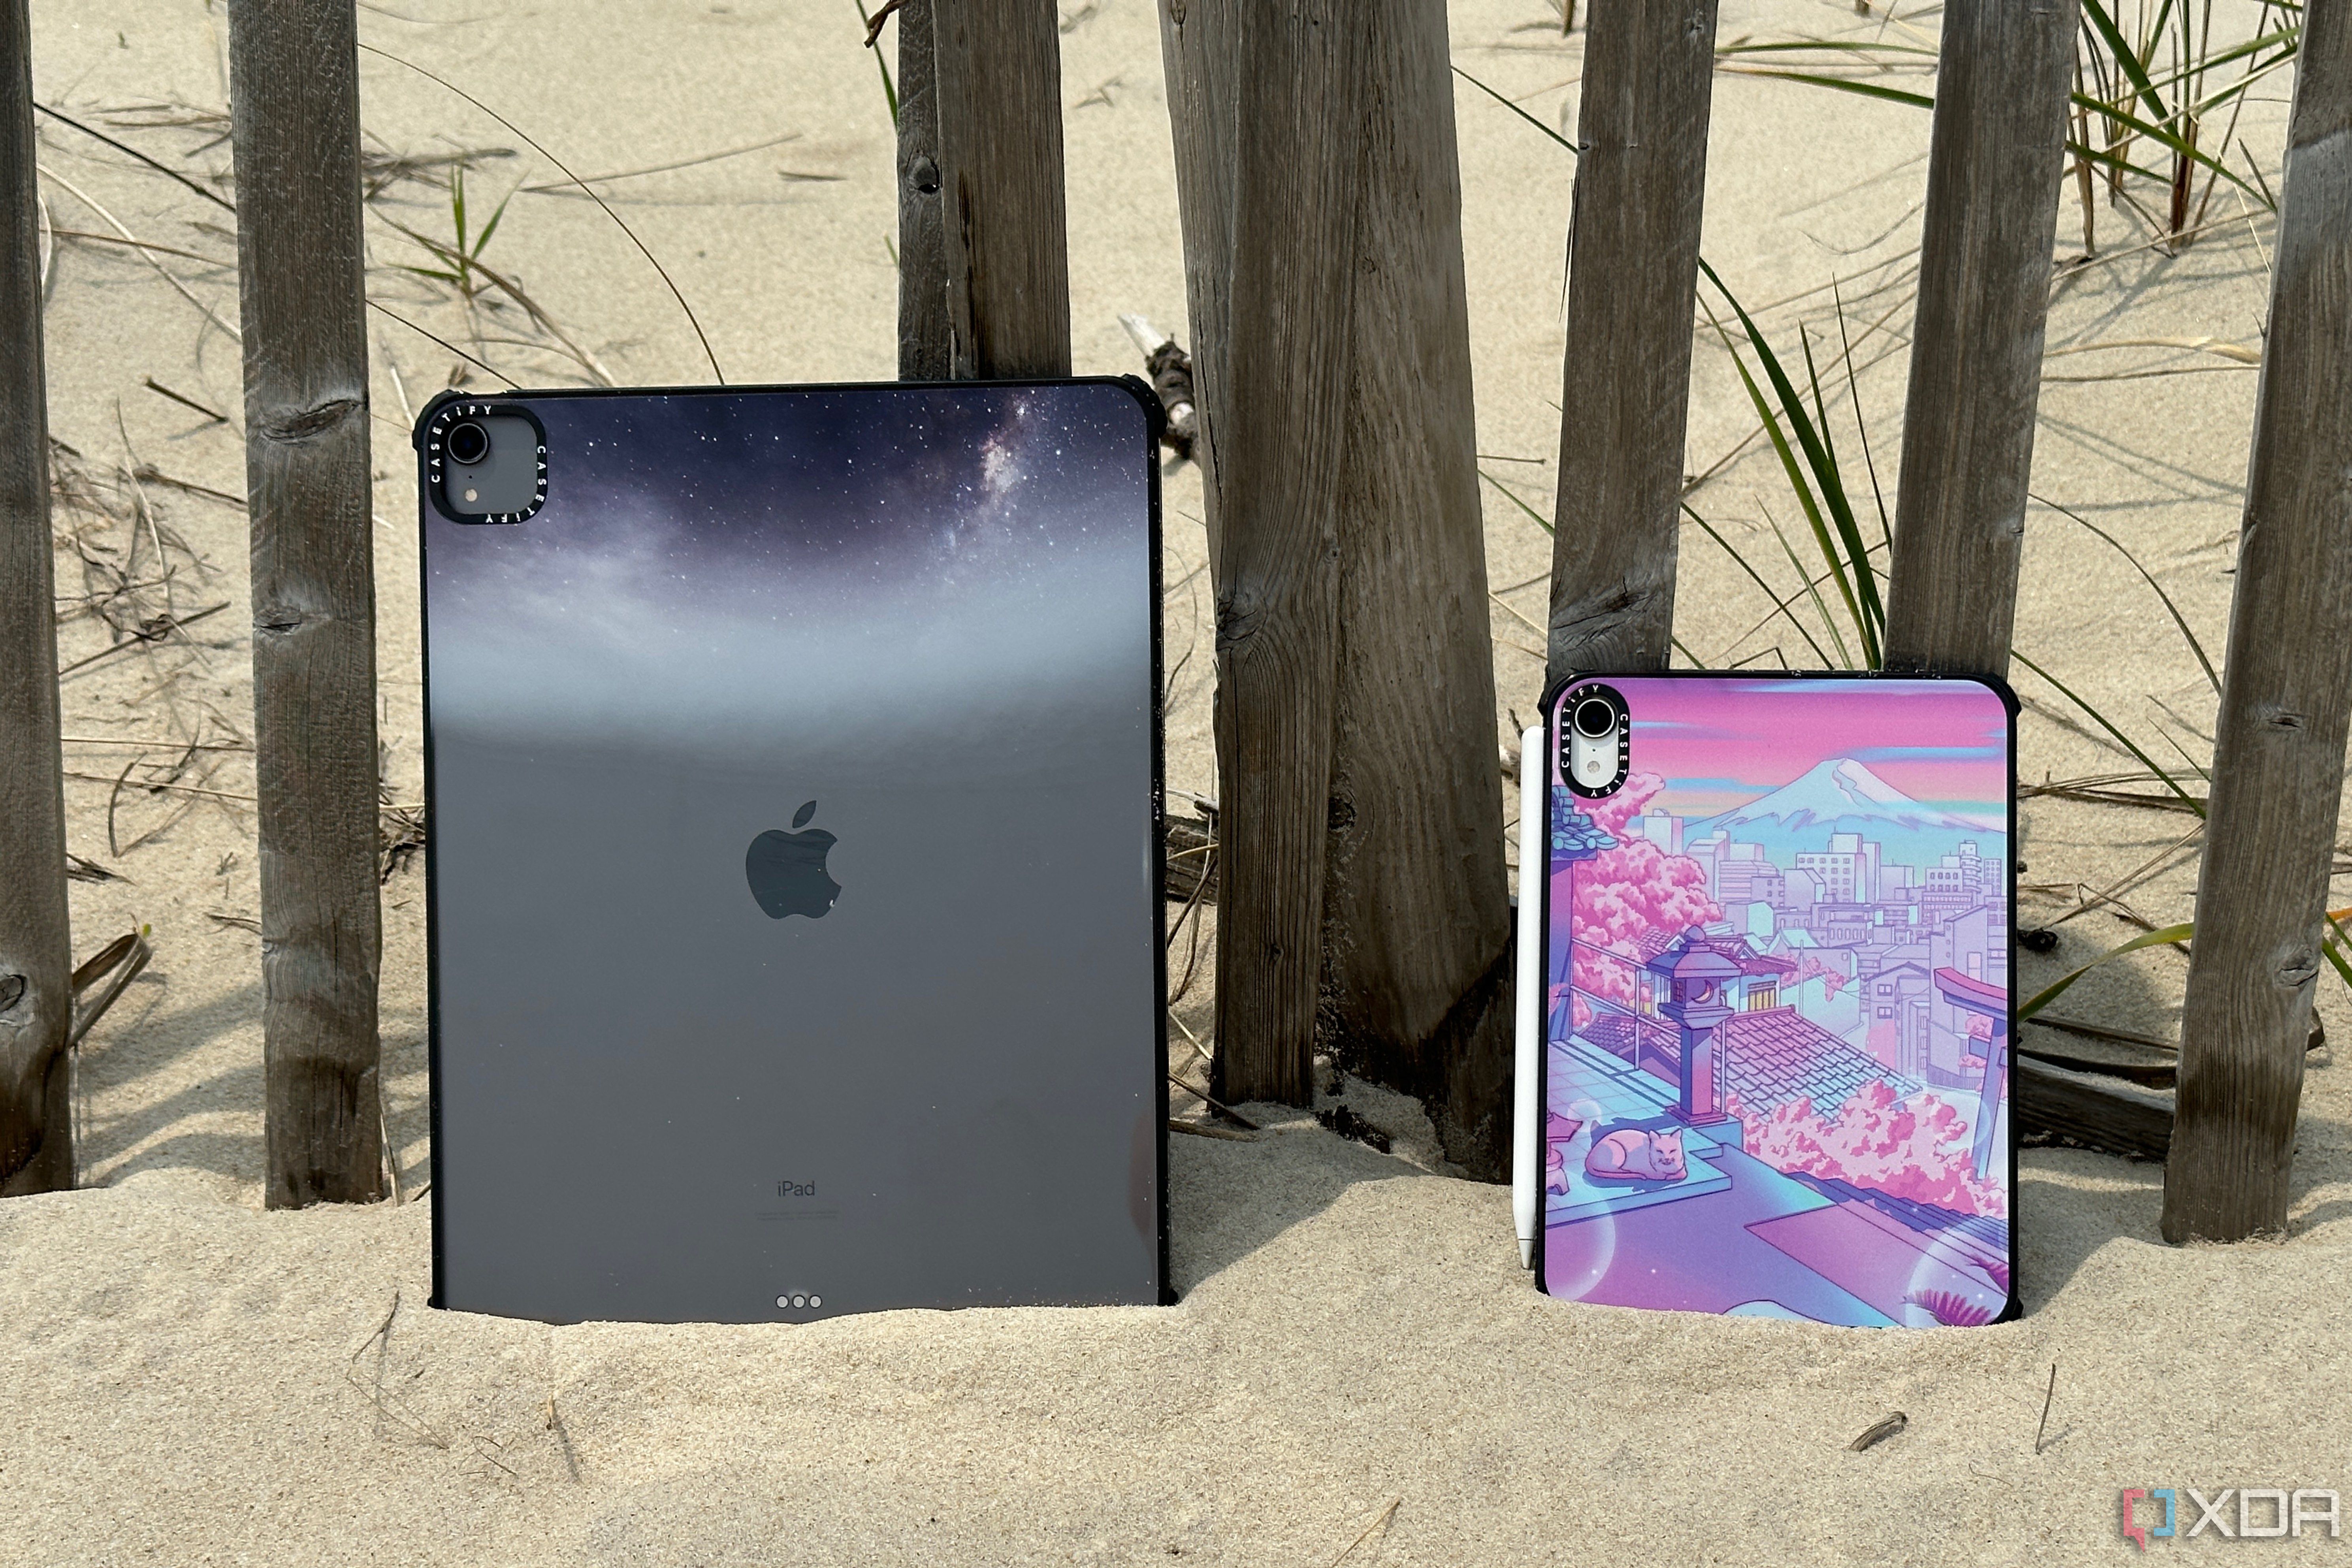 Casetify's Ultra Impact Cases for iPad against a wooden fence.